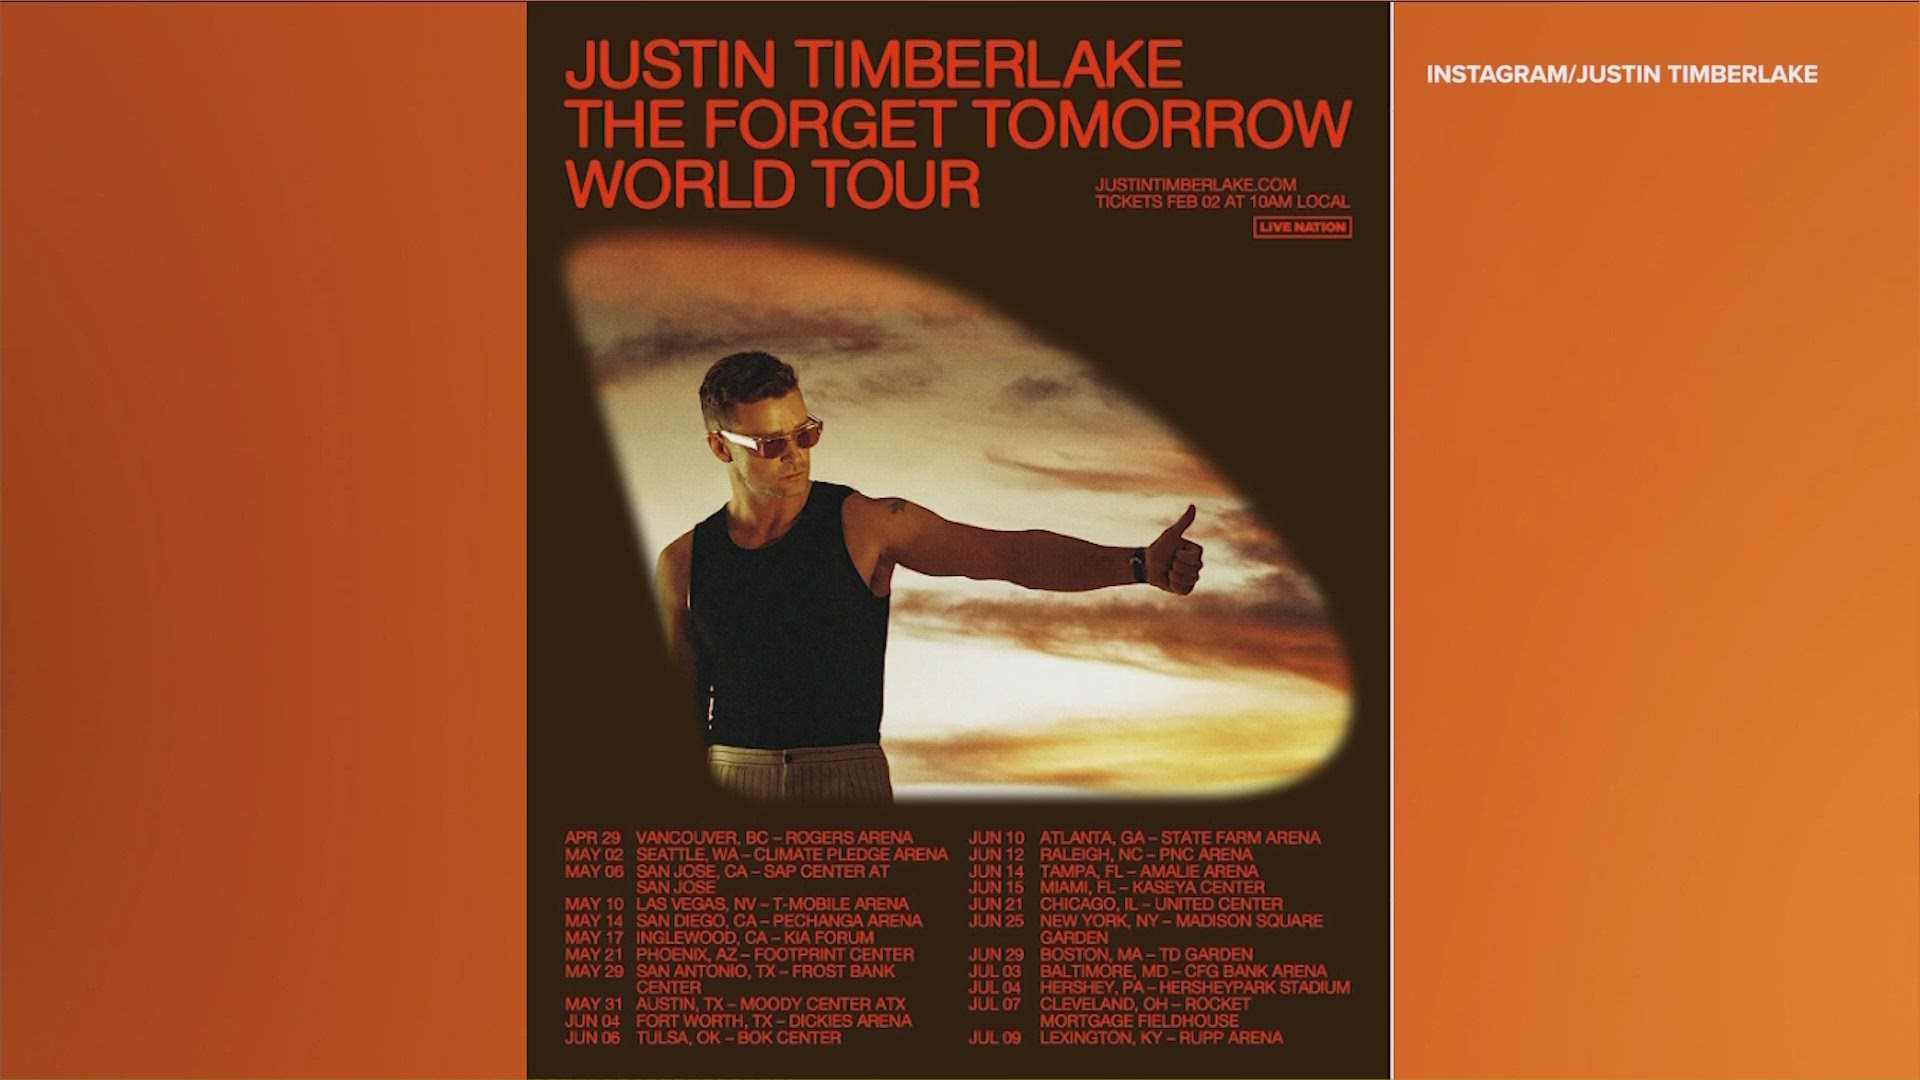 Justin Timberlake to play Austin's Moody Center in May